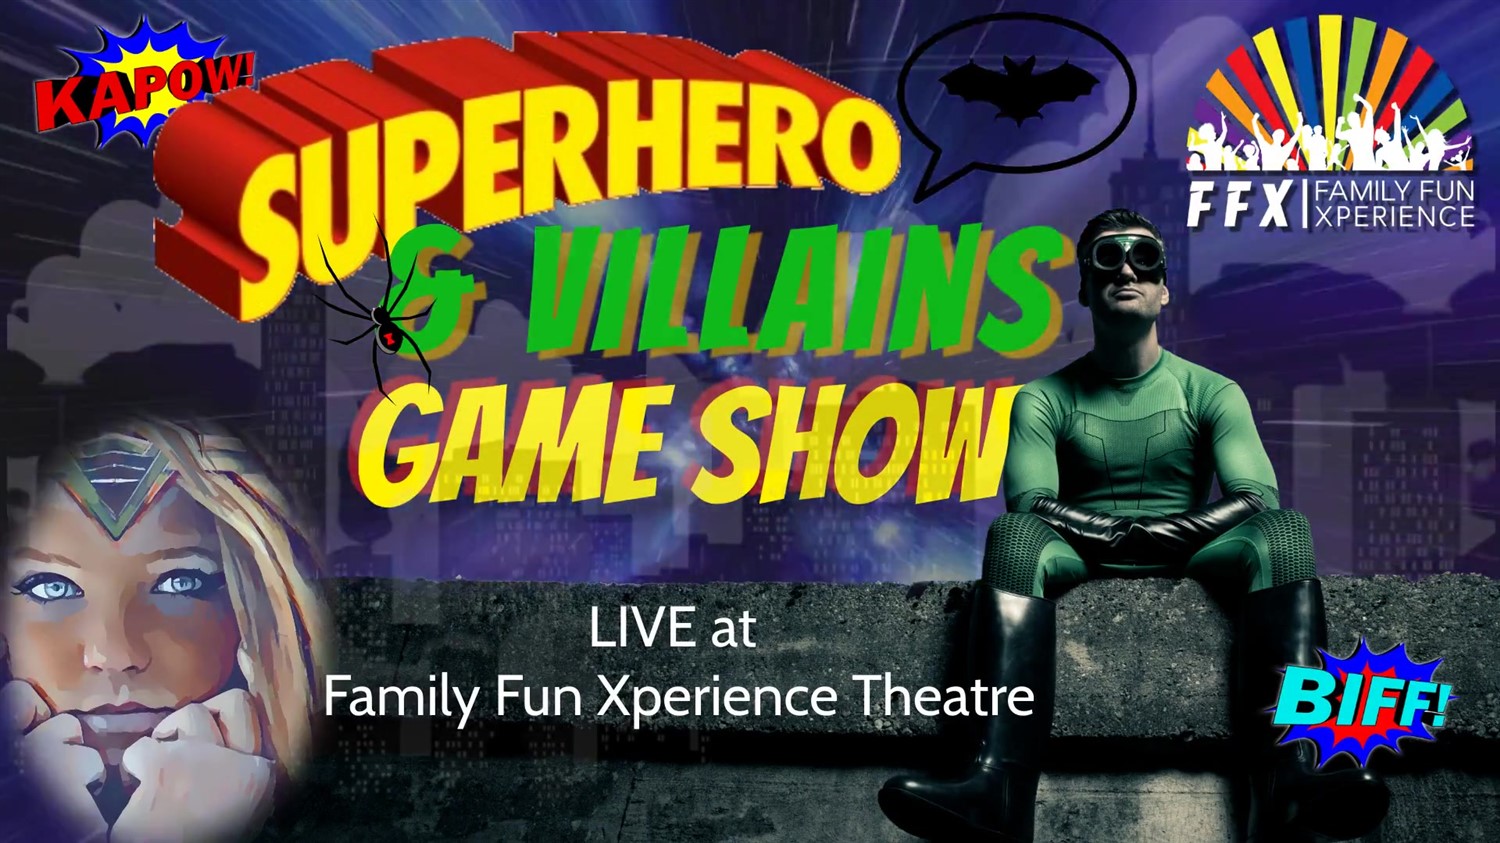 Superheroes & Villains Live Game Show Super fun for everyone! on ene. 22, 19:00@FFX Theatre - Buy tickets and Get information on Family Fun Xperience tickets.ffxshow.org